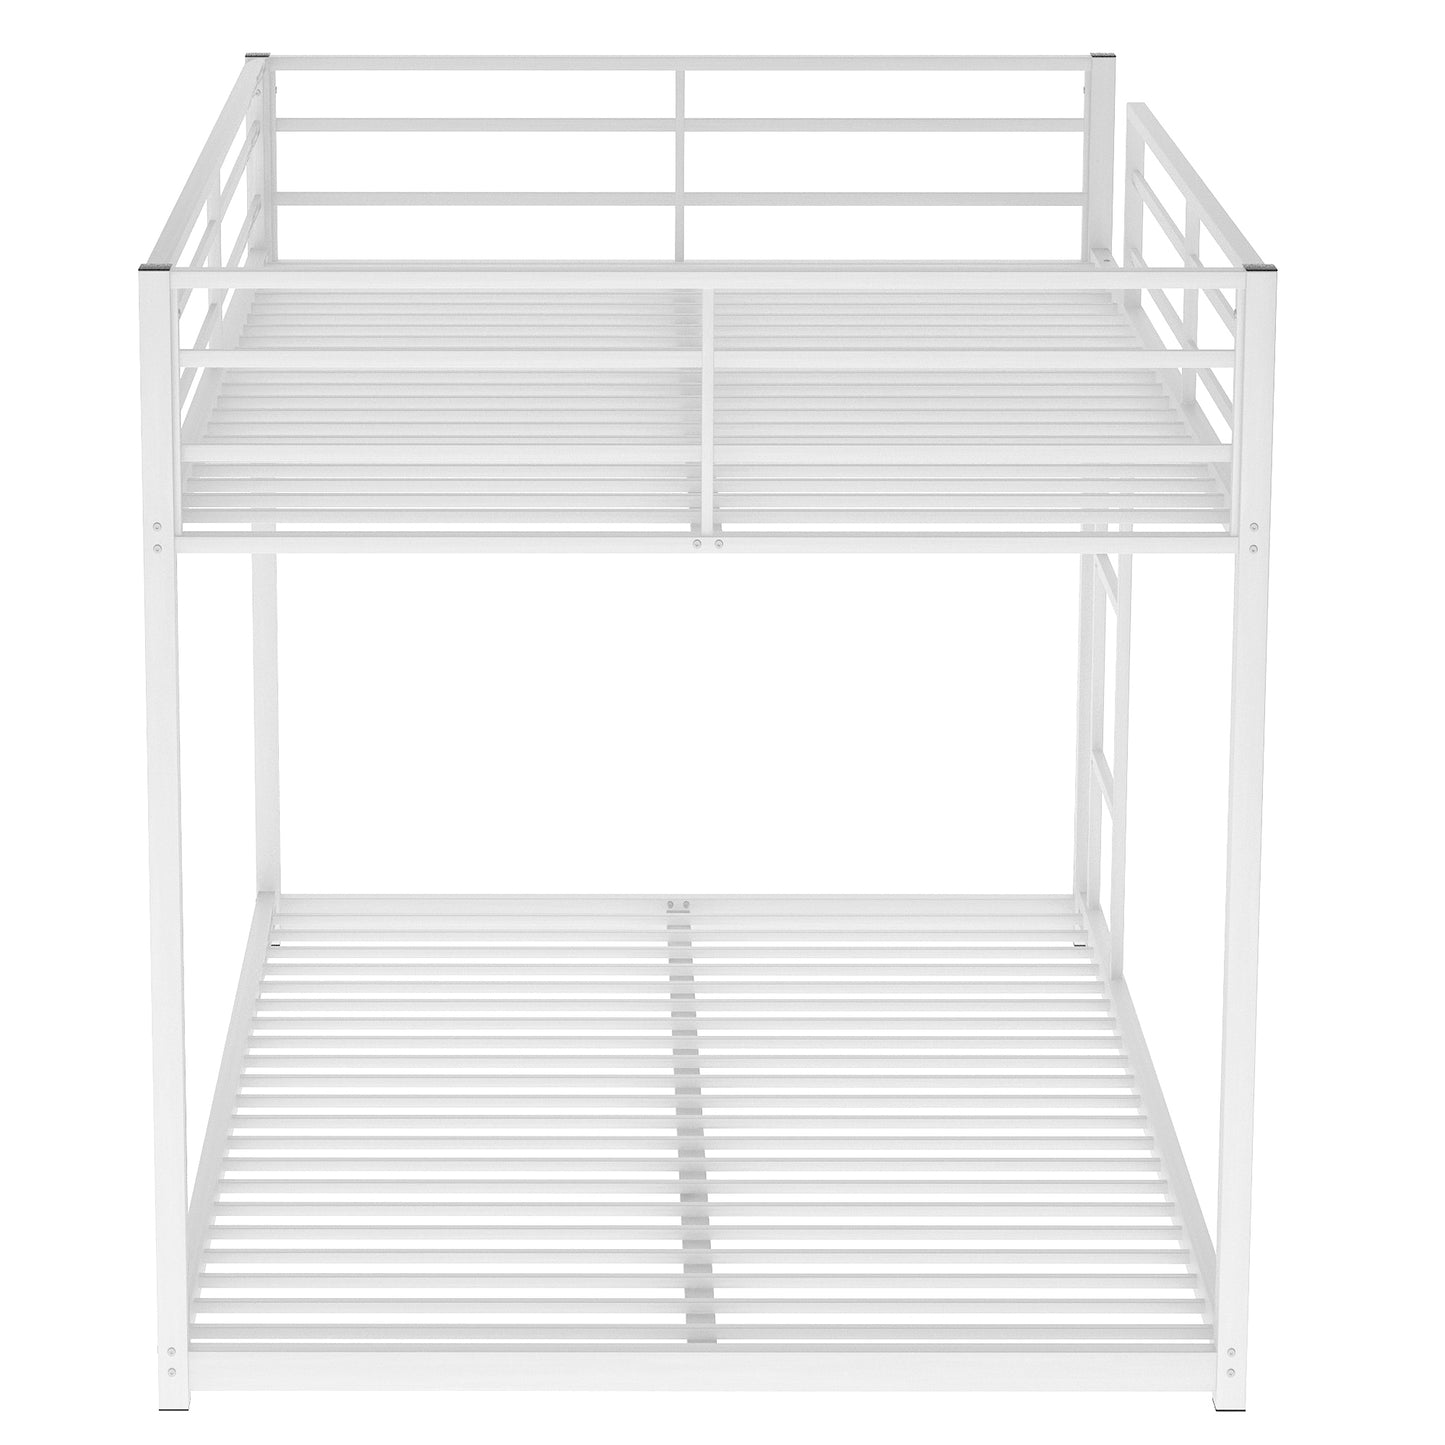 Full over Full Metal Bunk Bed, Low Bunk Bed with Ladder, White